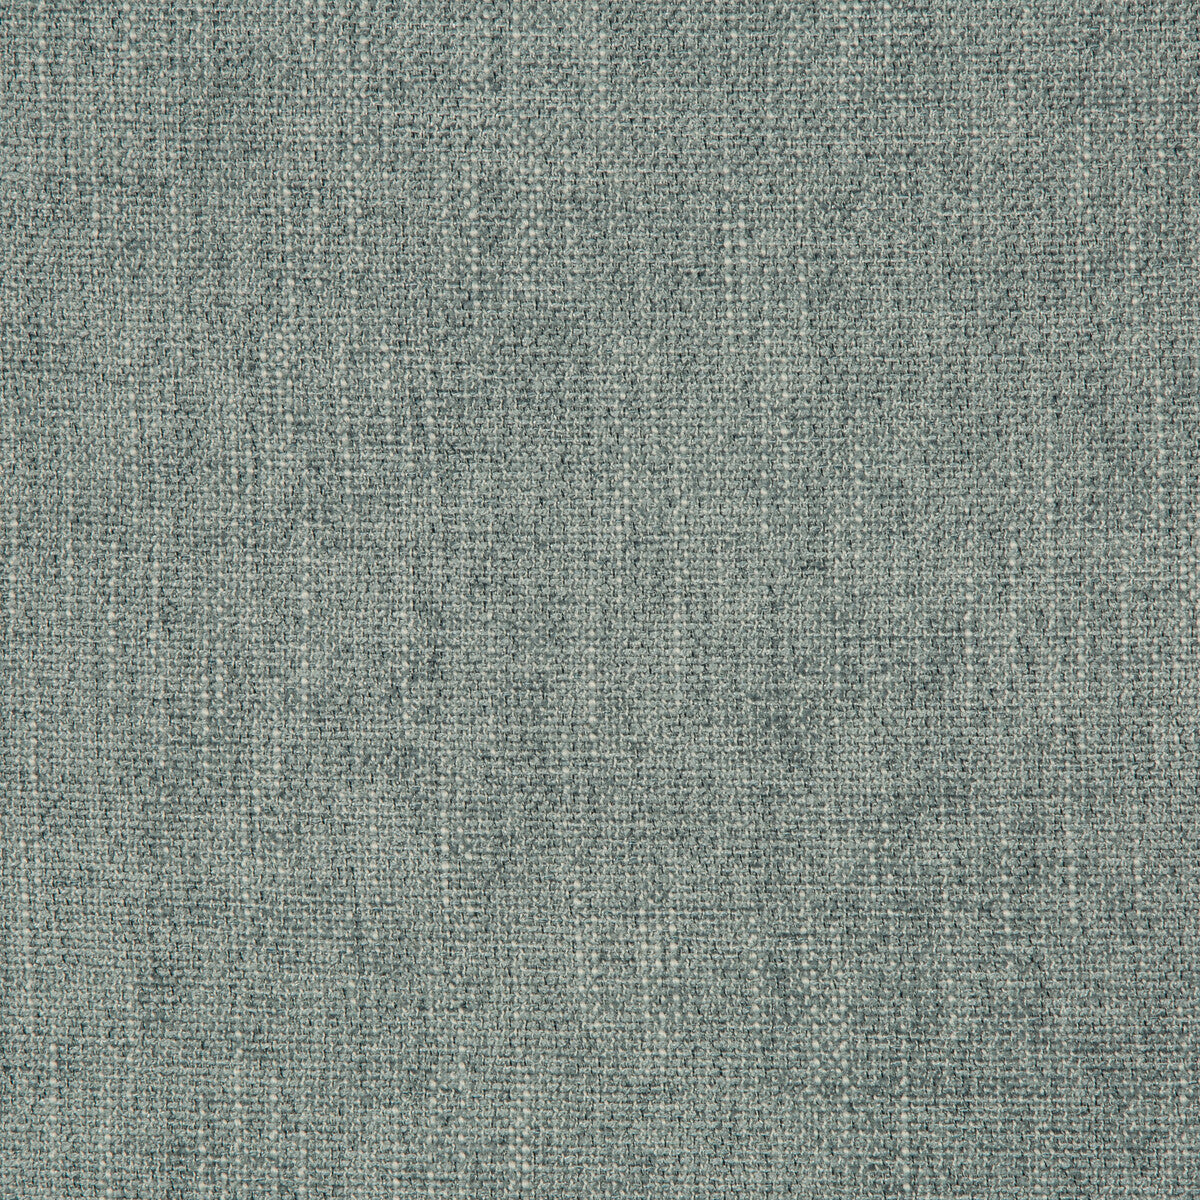 Kravet Smart fabric in 35973-15 color - pattern 35973.15.0 - by Kravet Smart in the Performance Crypton Home collection